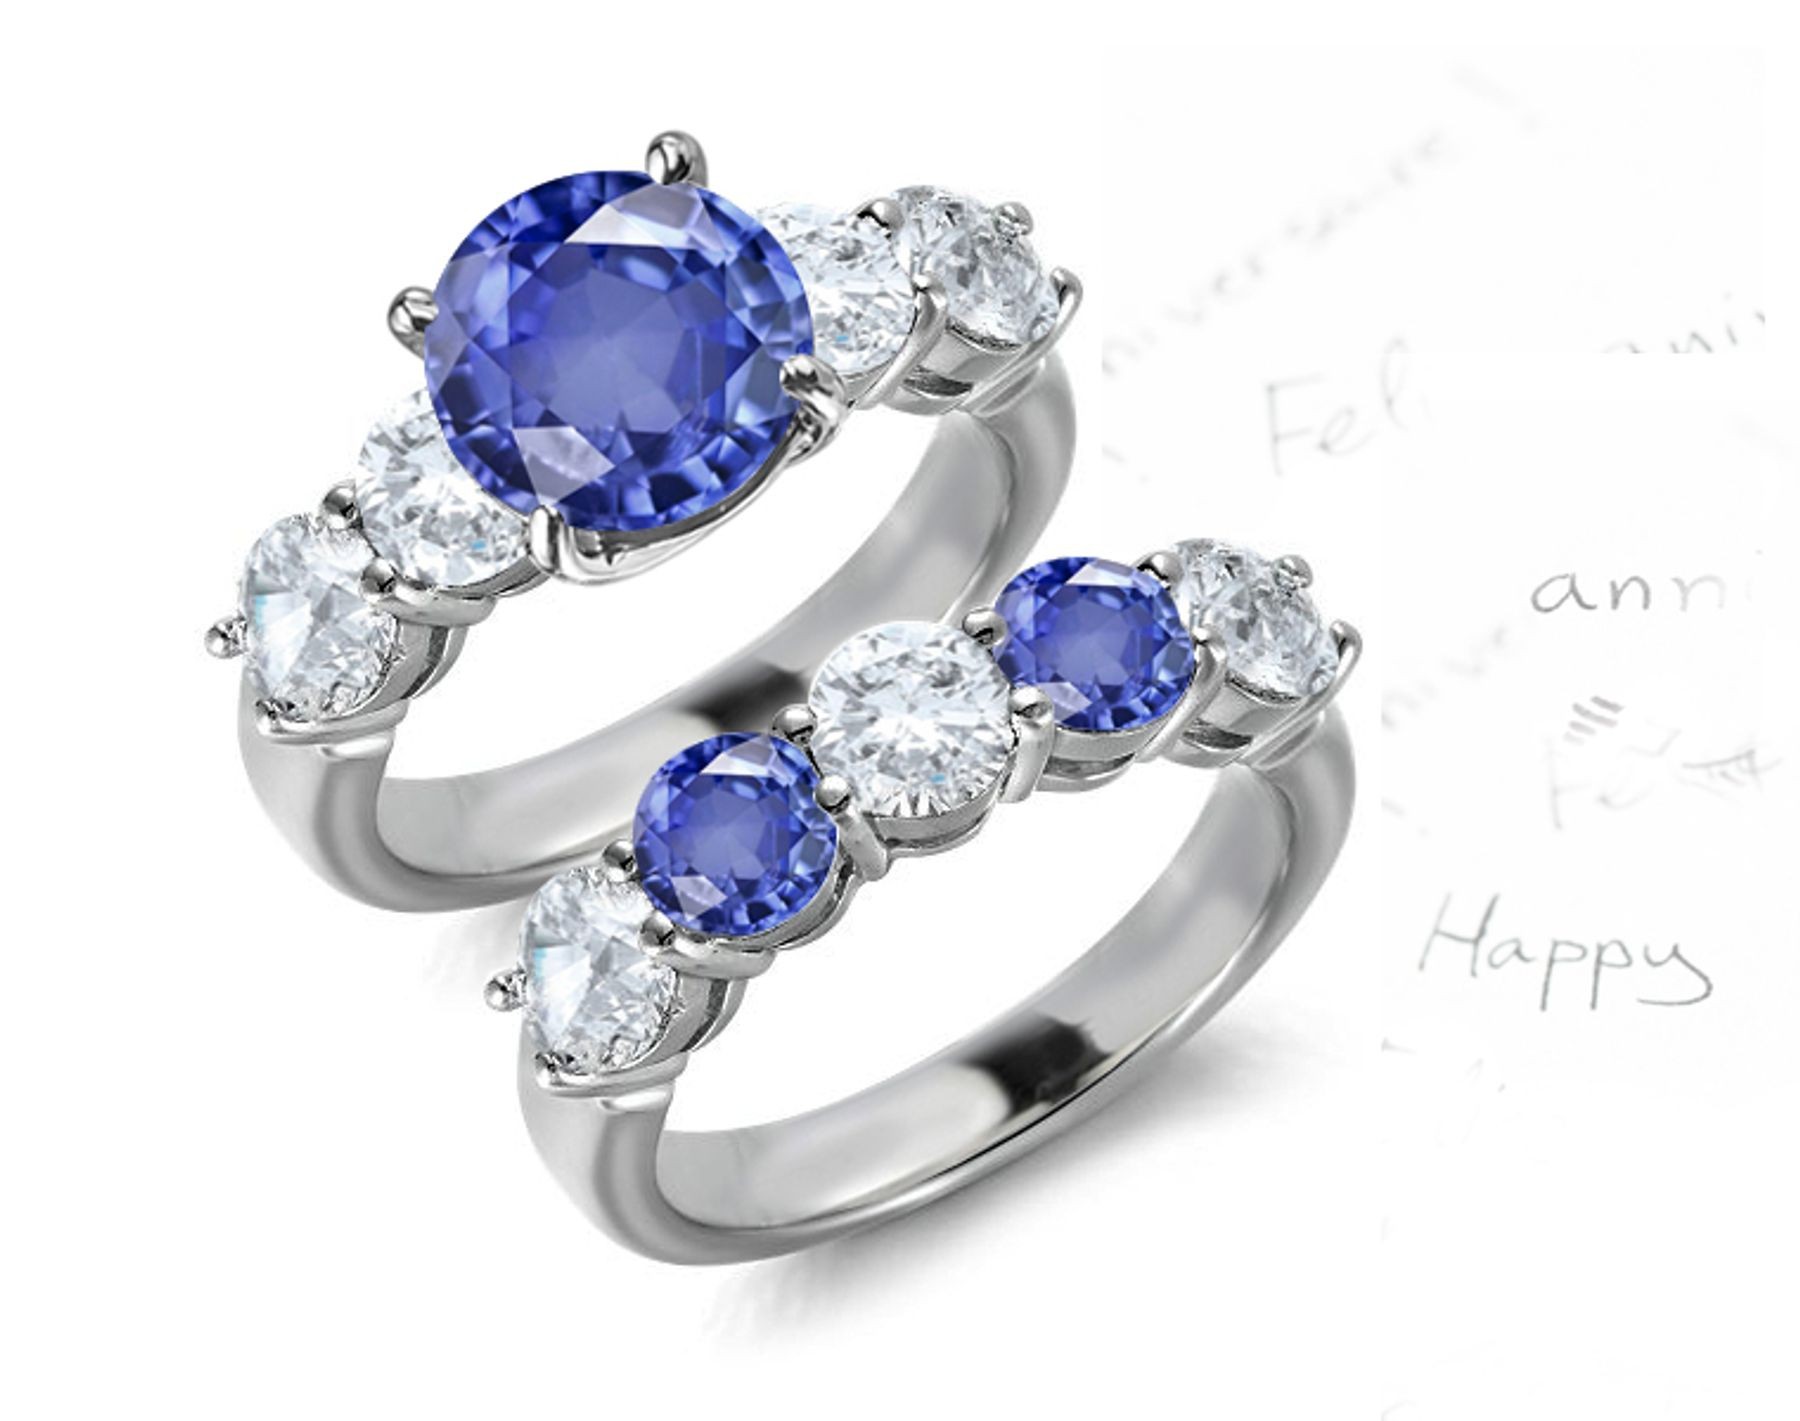 God Hath Joined Together: 5 Stone Style Diamond Velvety Blue Sapphire Ring & 5 Stone Style Gold Anniversary Band